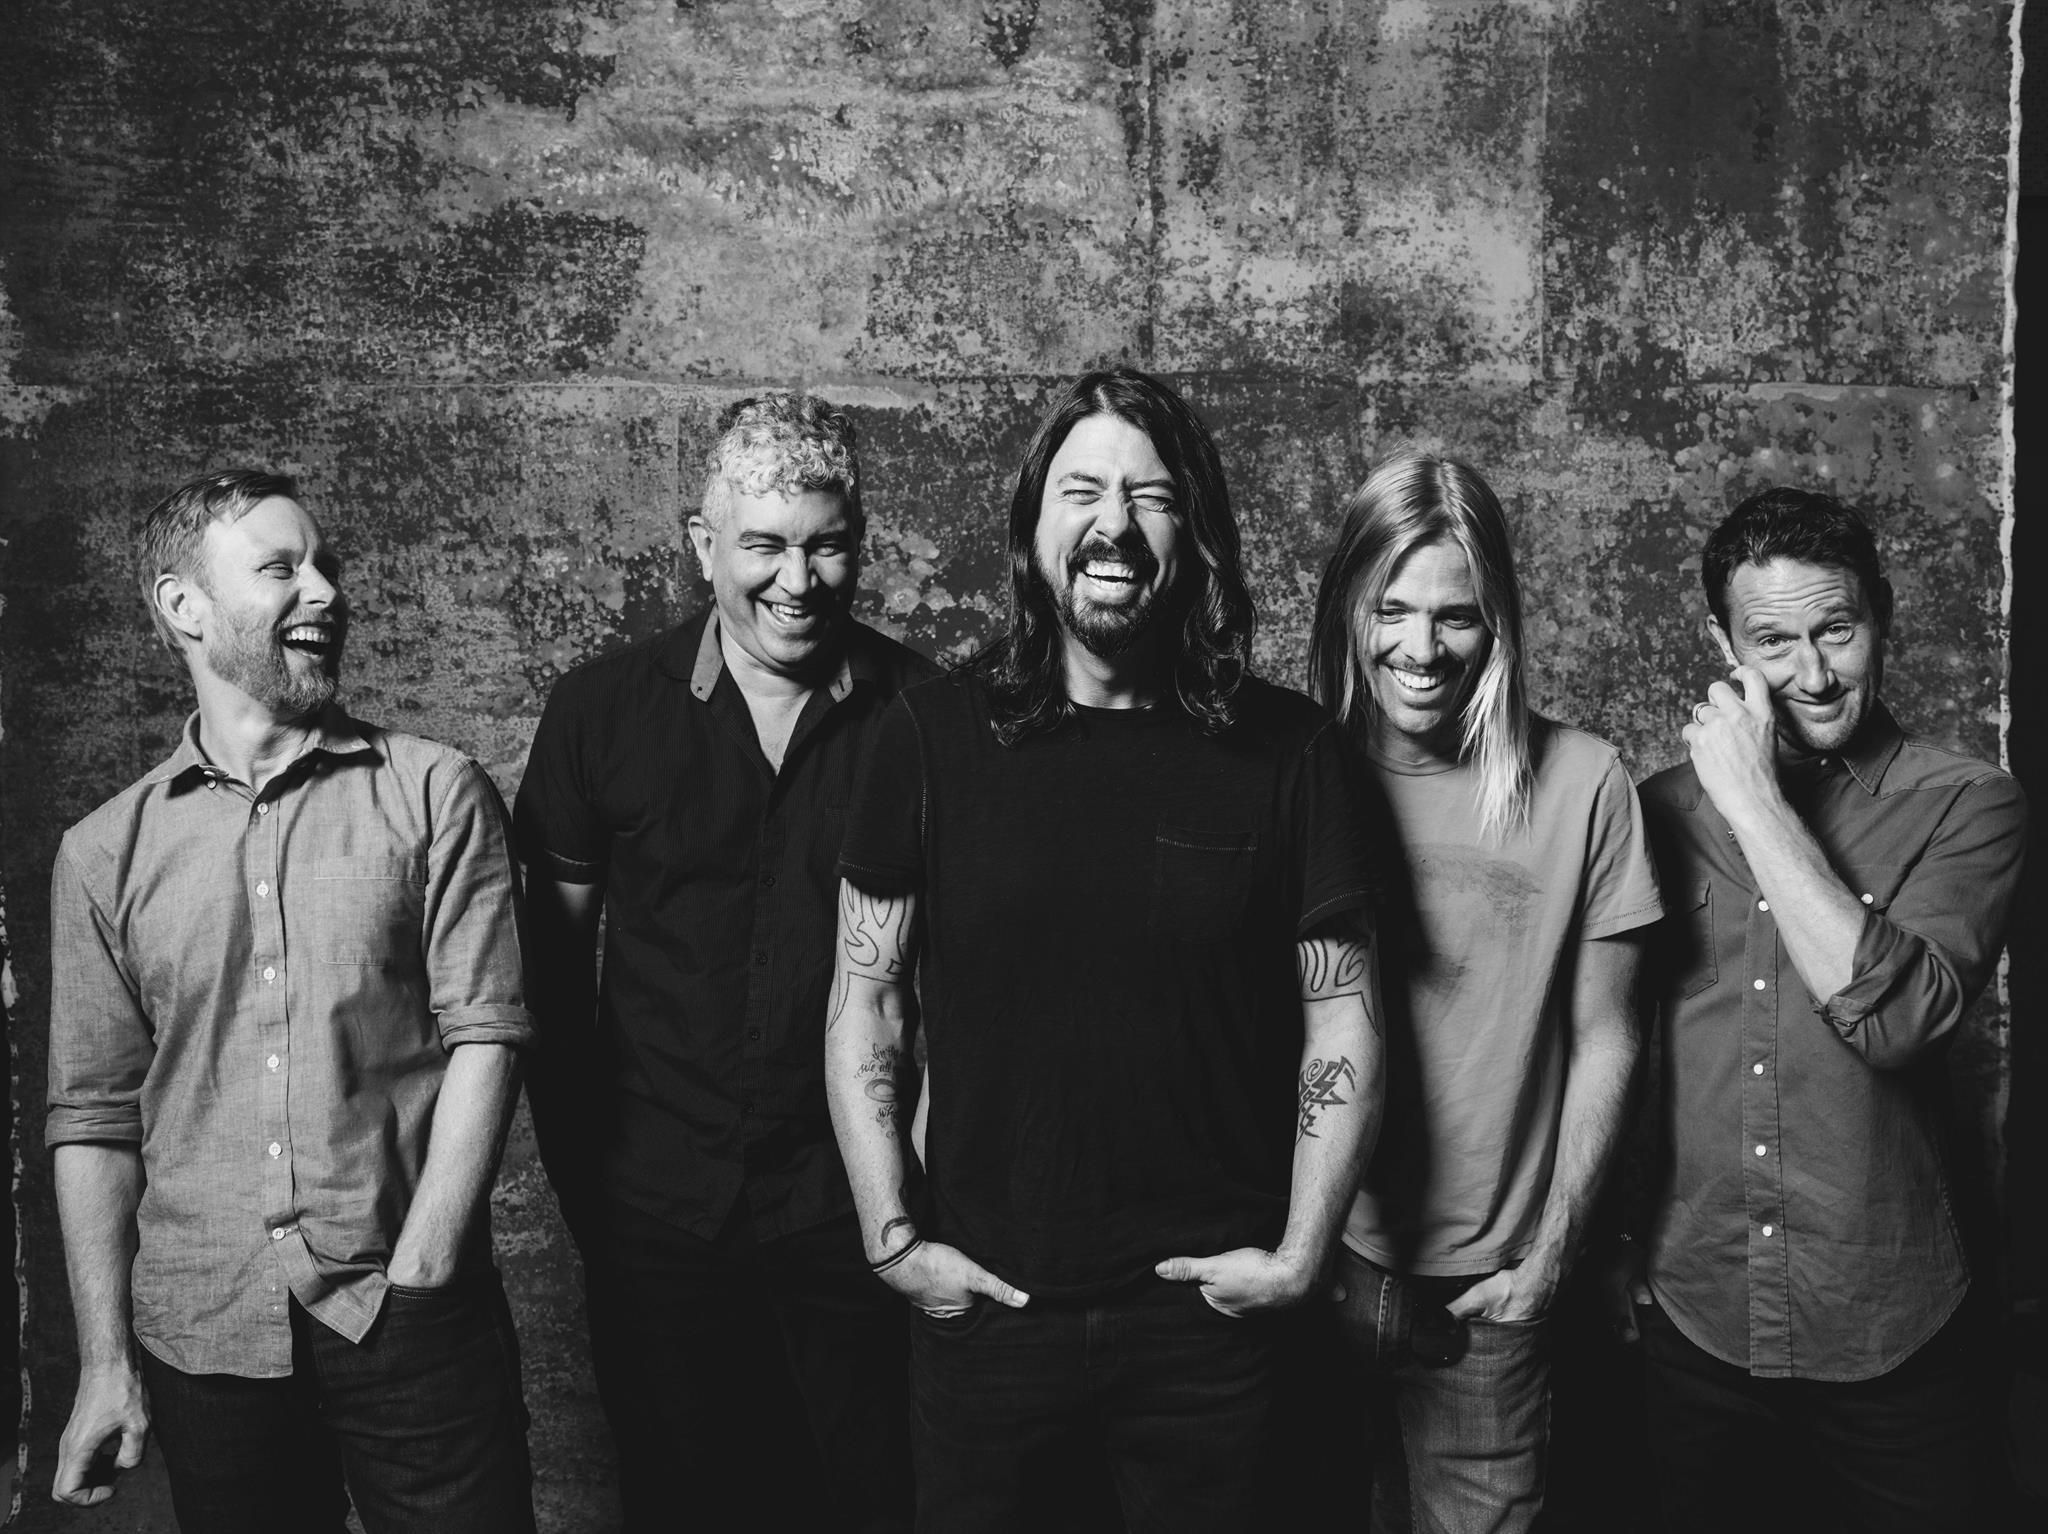 Foo Fighters + Queens of the Stone Age concert in Vienna